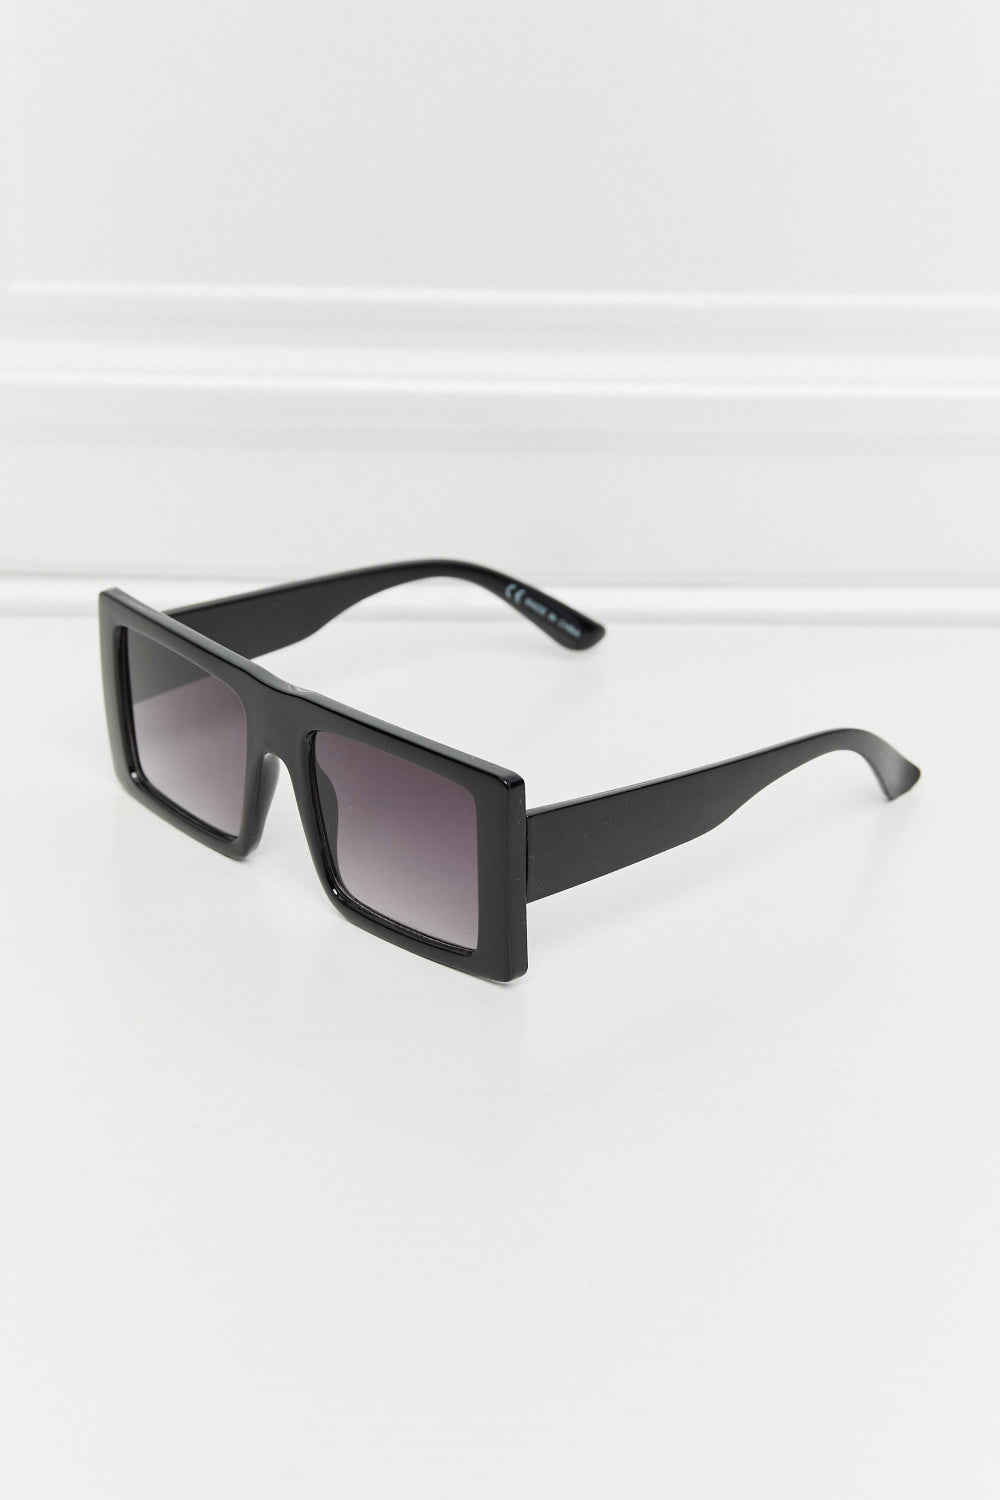 Emily Square Sunglasses, TWO colors!